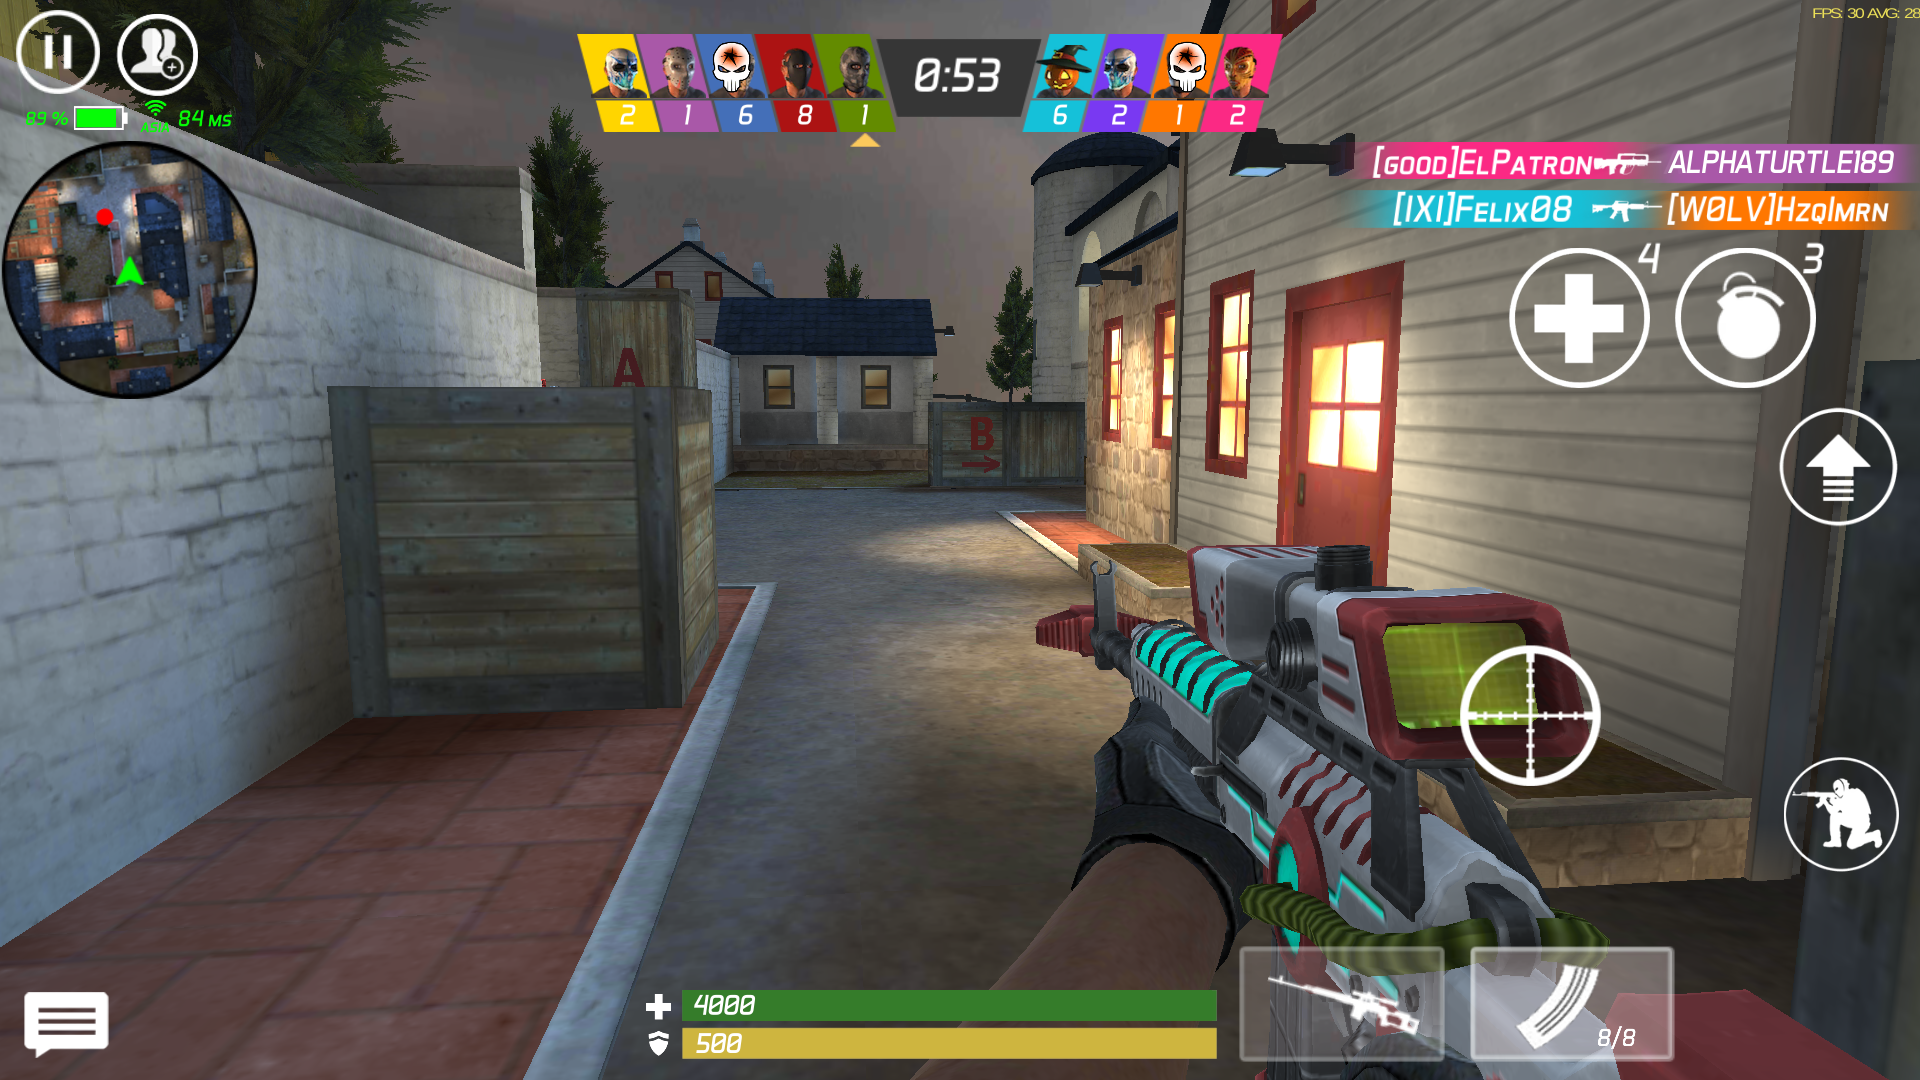 Beta Call Of Duty Mobile With Data Hackapps.Club - Cod ... - 